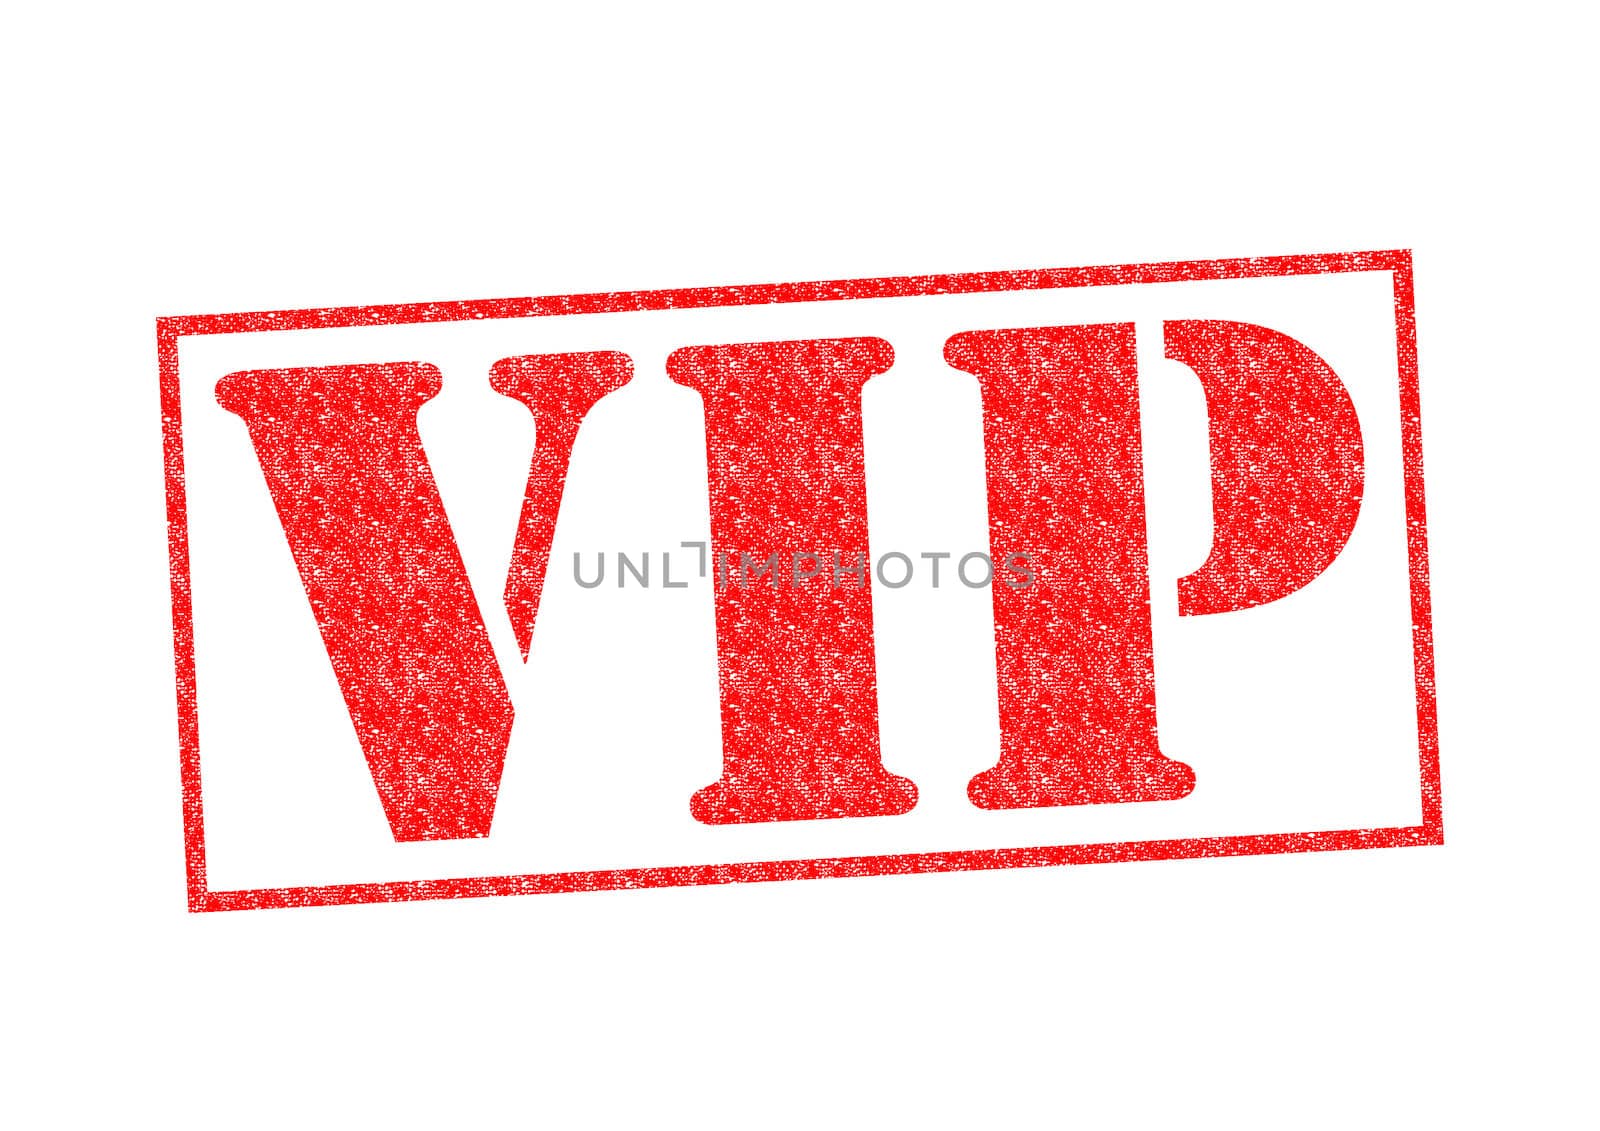 VIP Rubber Stamp over a white background.